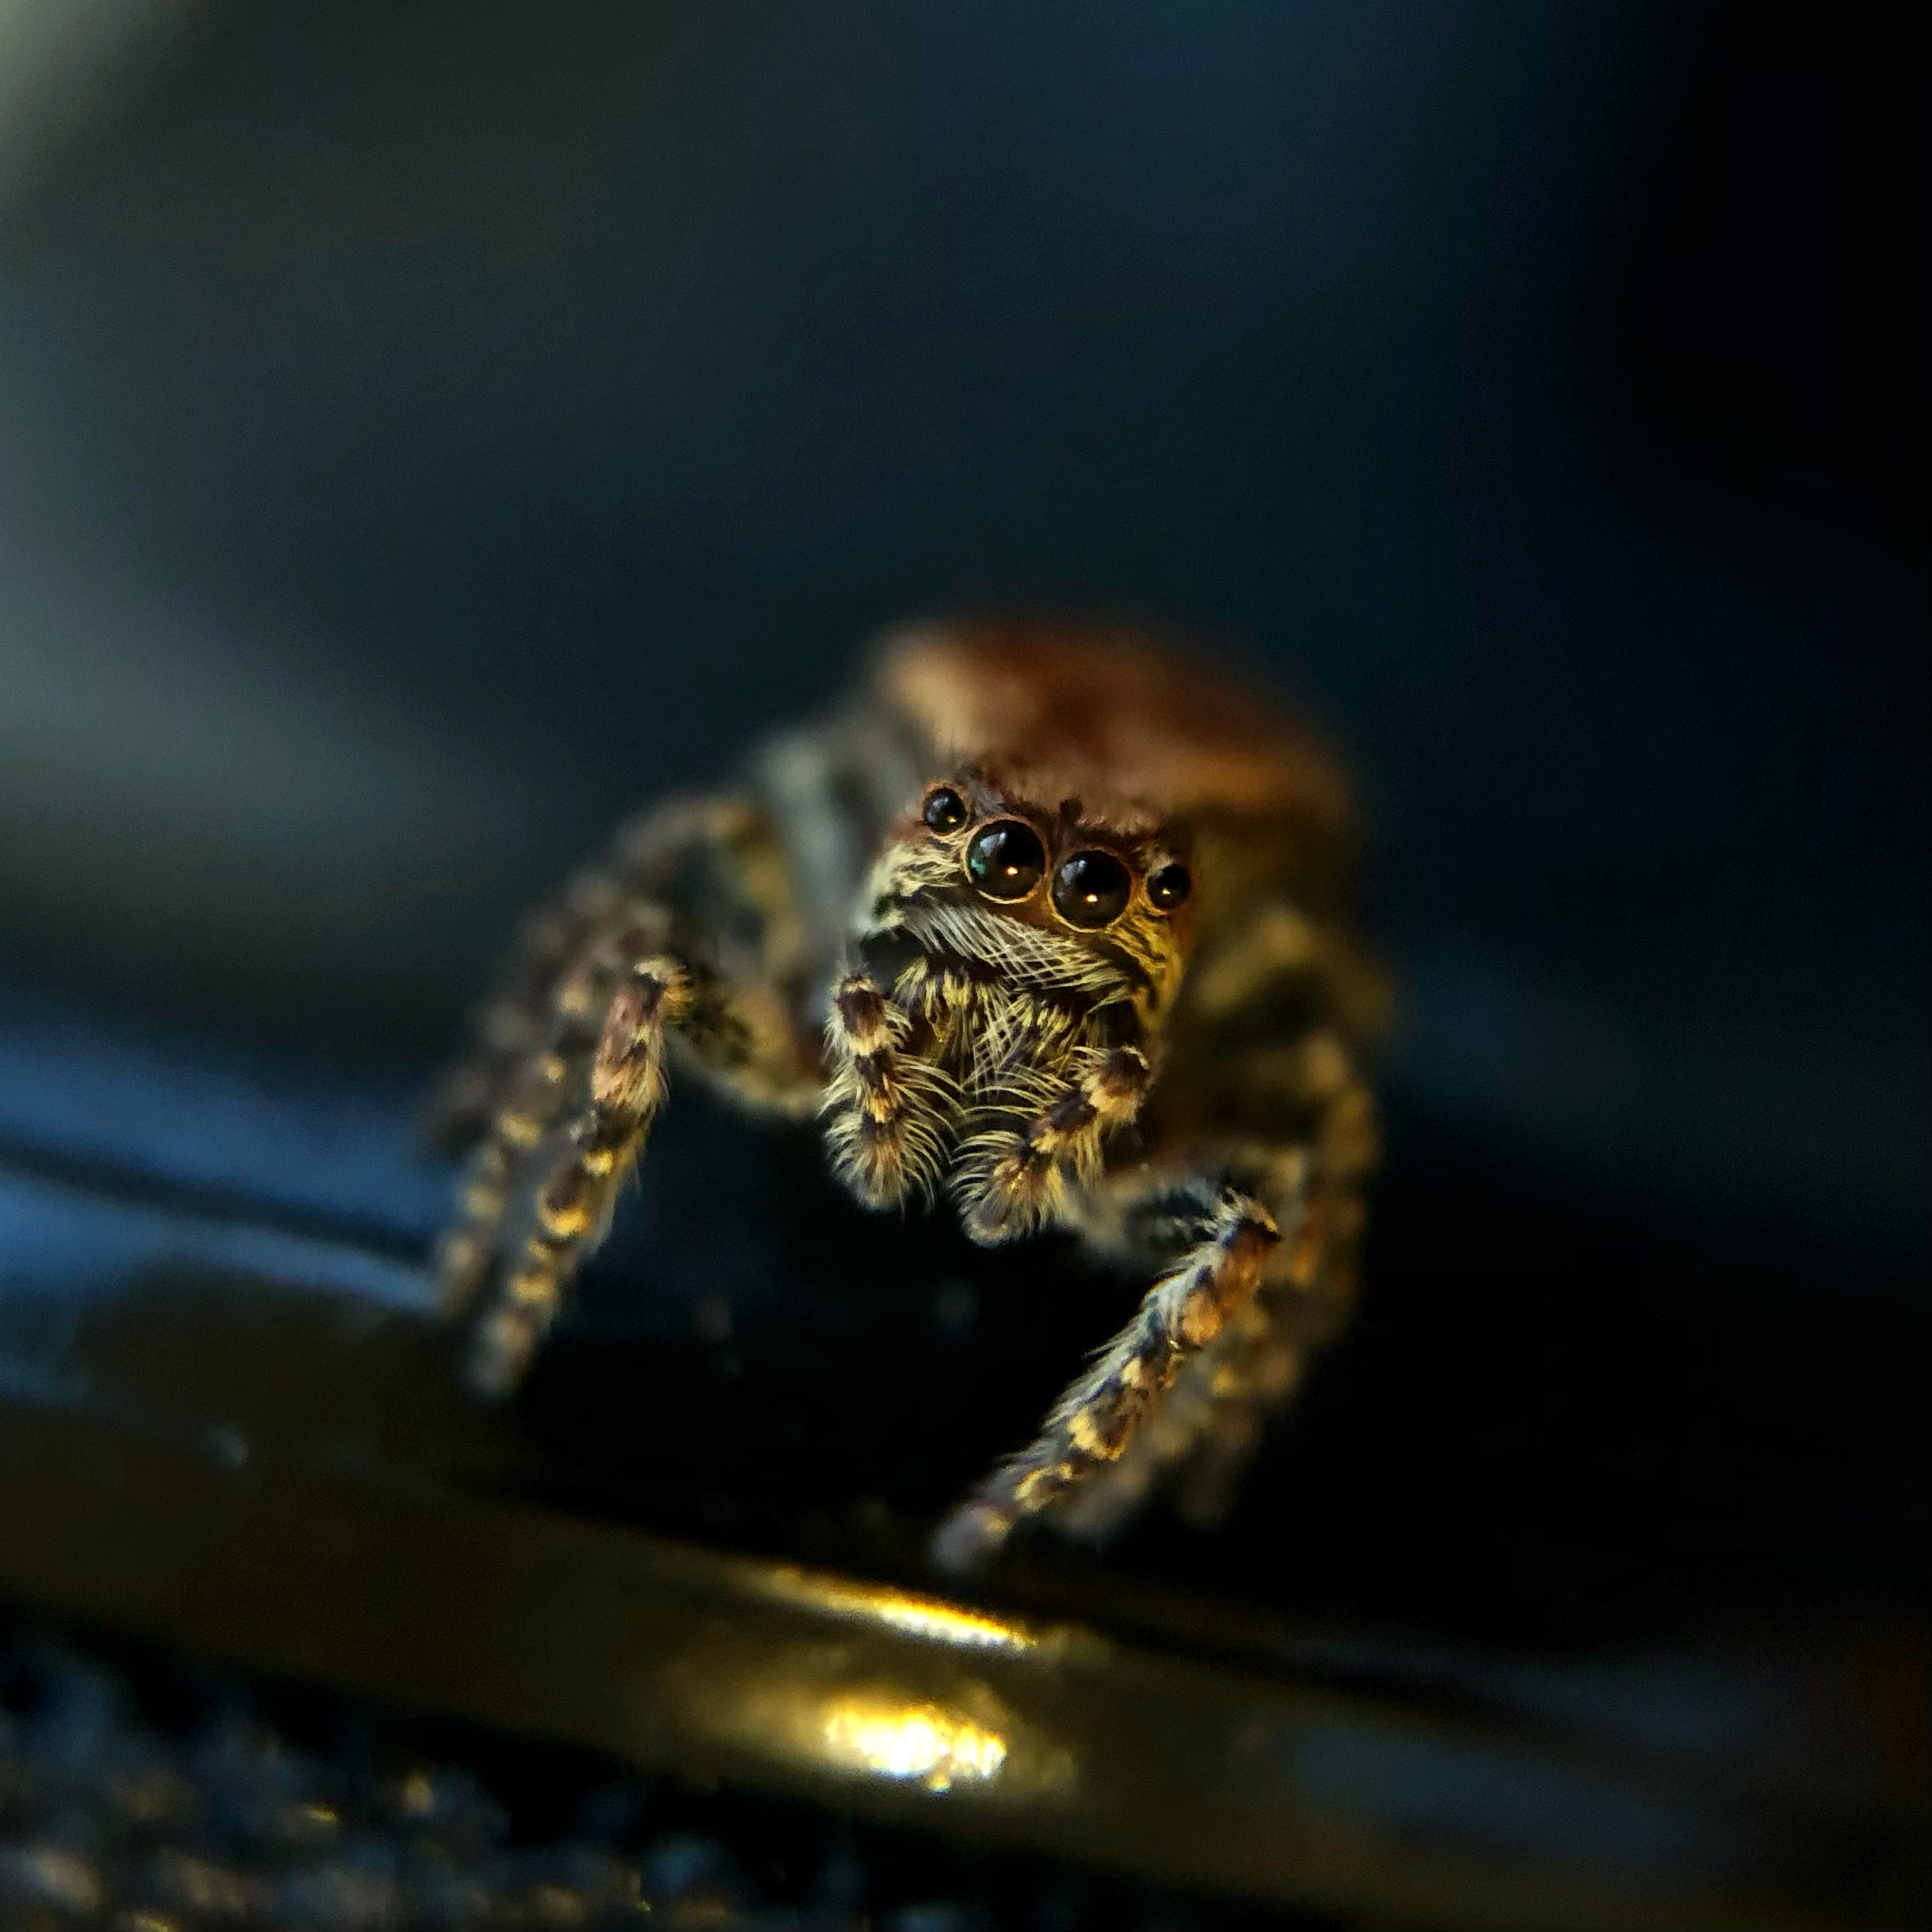 Sevaea sp jumping spider looking at me